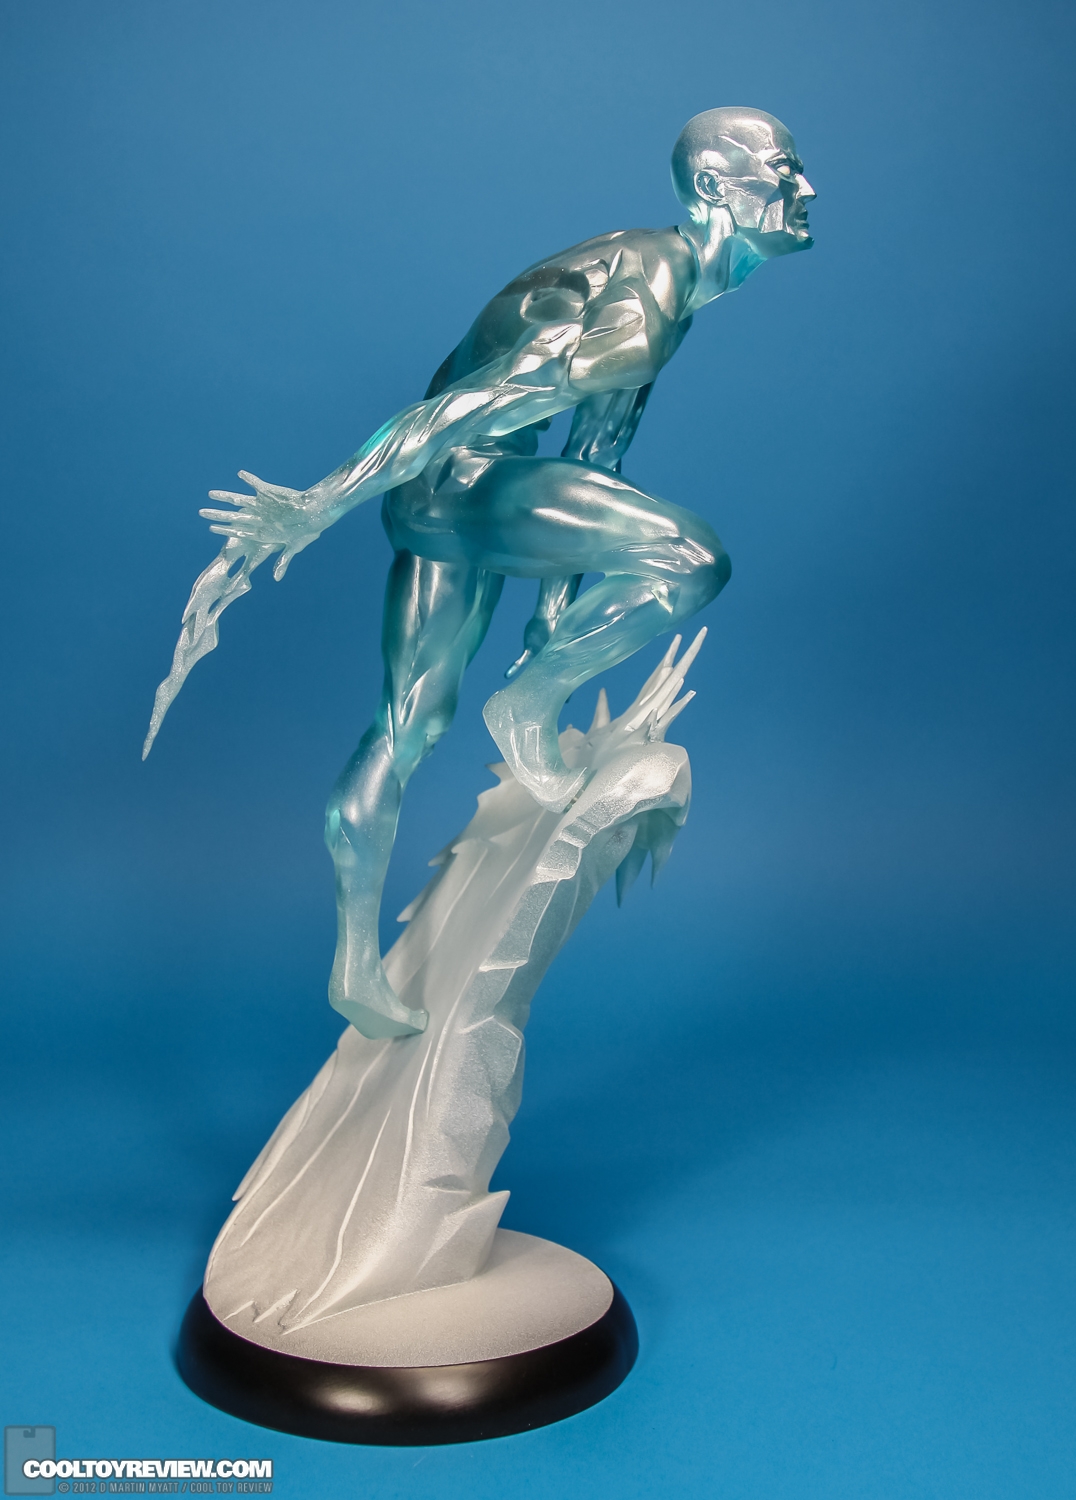 Iceman_Comiquette_Sideshow_Collectibles-02.jpg